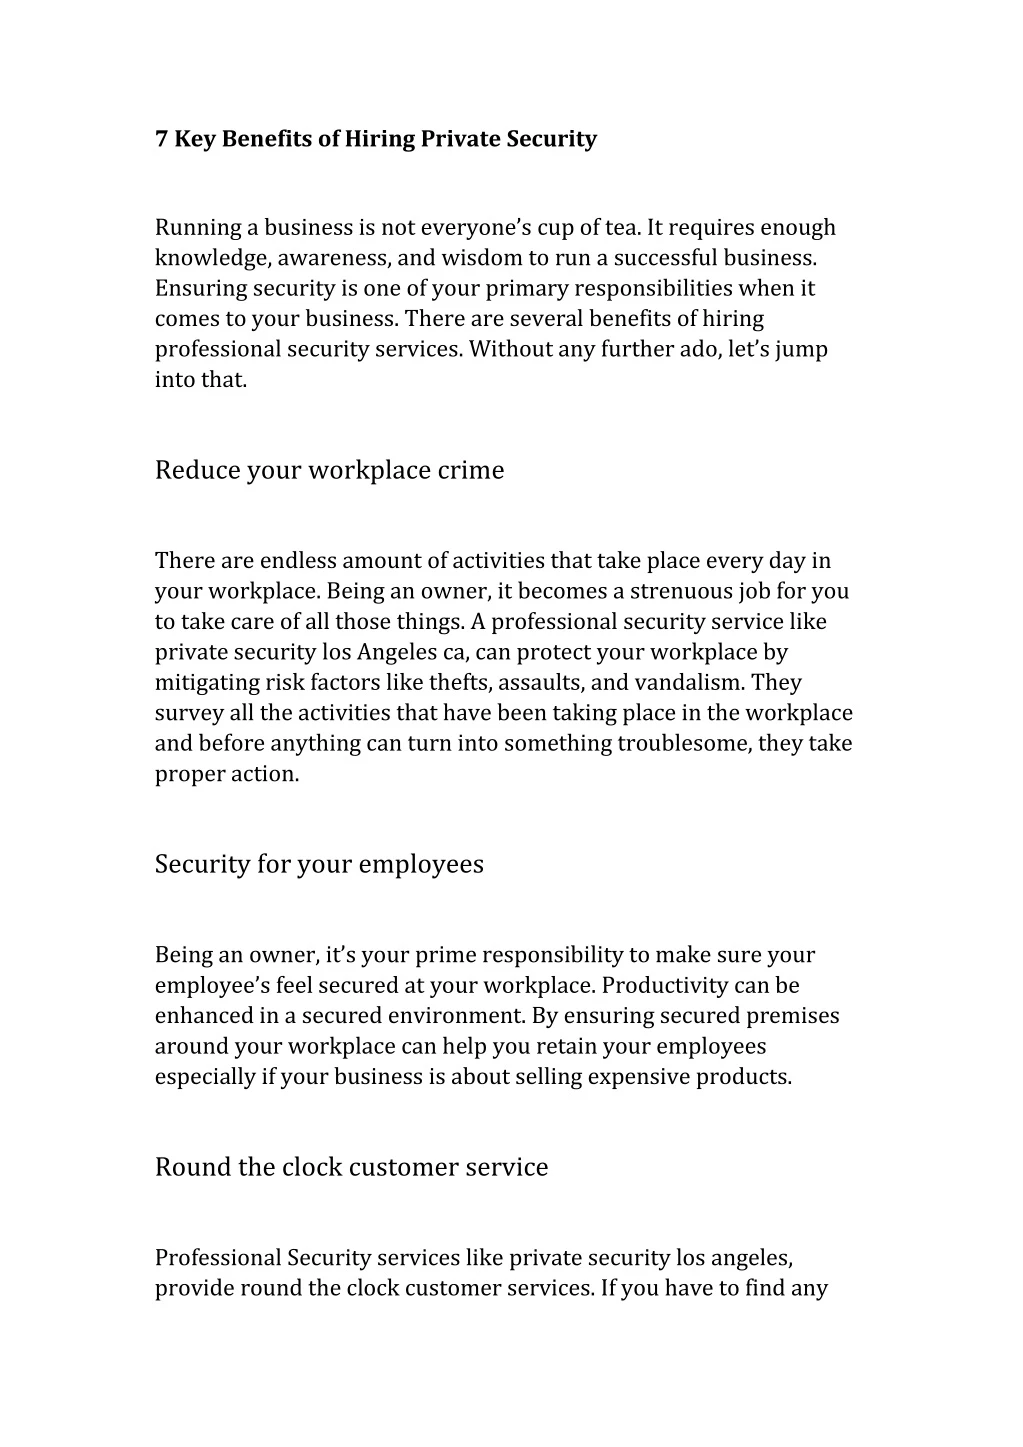 7 key benefits of hiring private security